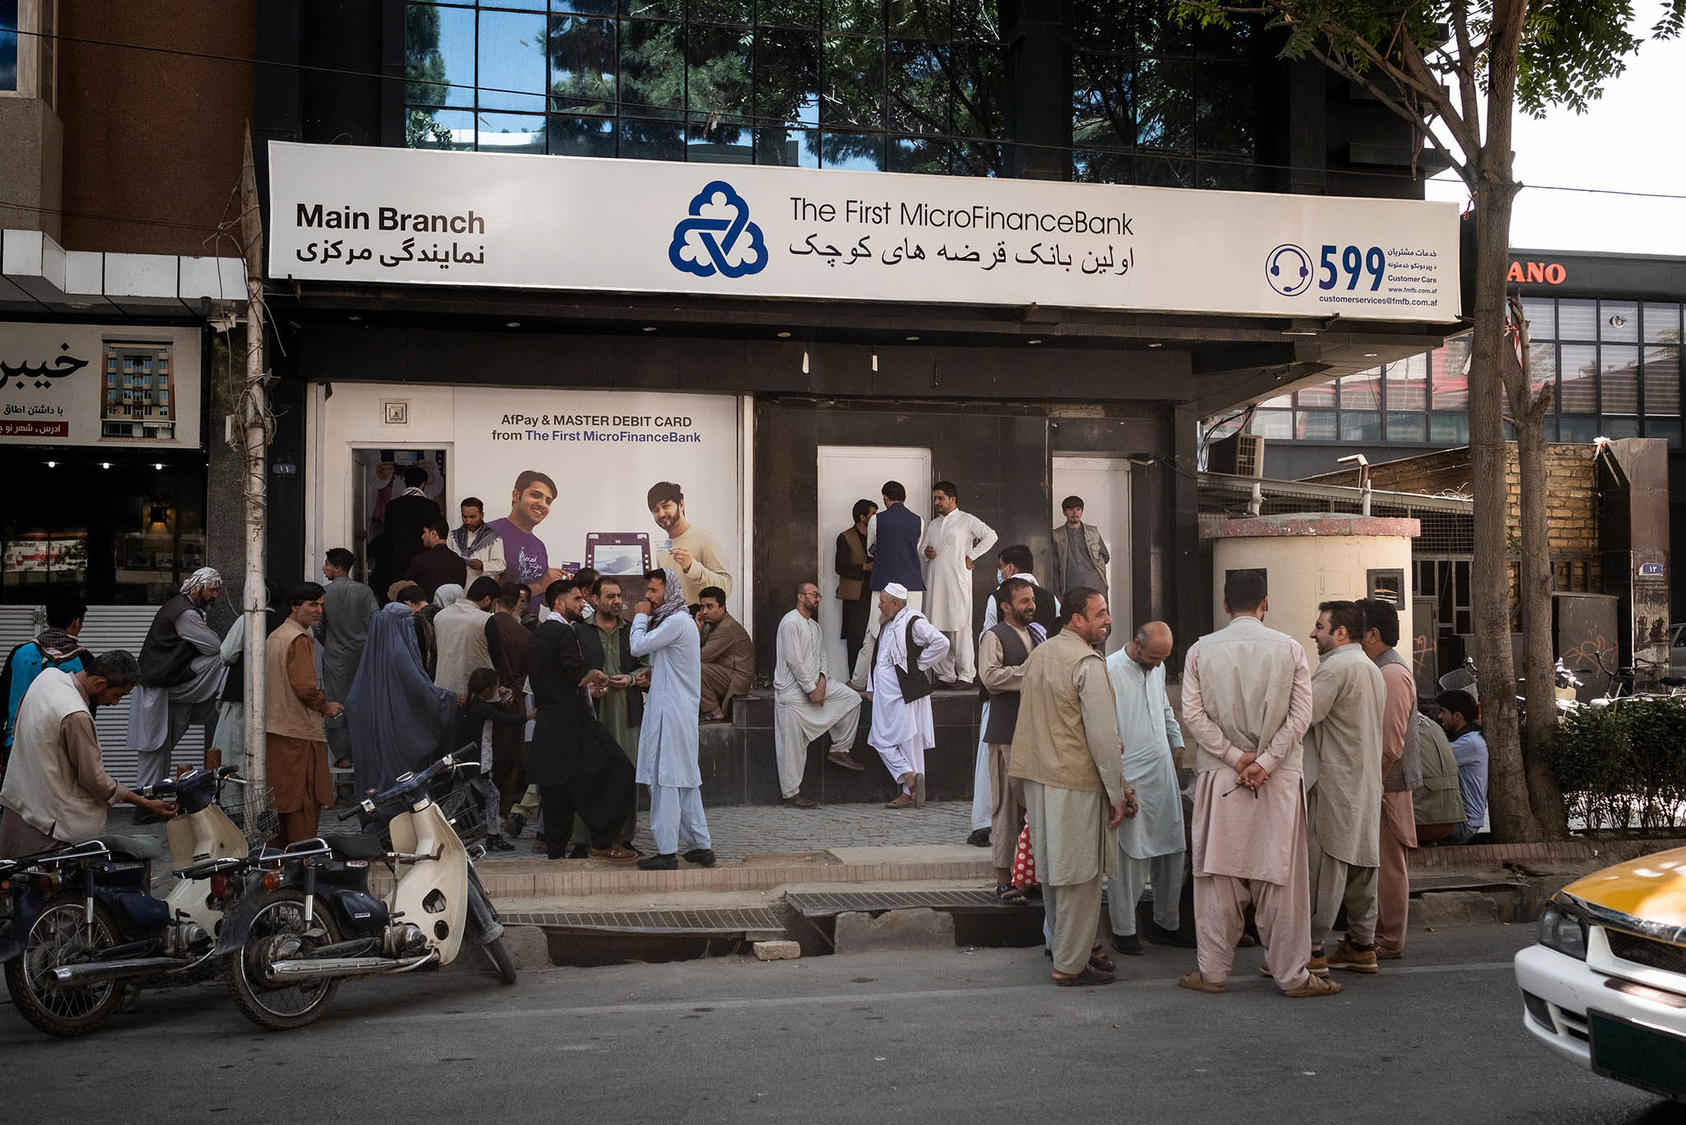 People congregate outside a bank in Kabul, Afghanistan on Thursday, Aug. 26, 2021. (Jim Huylebroek/The New York Times)